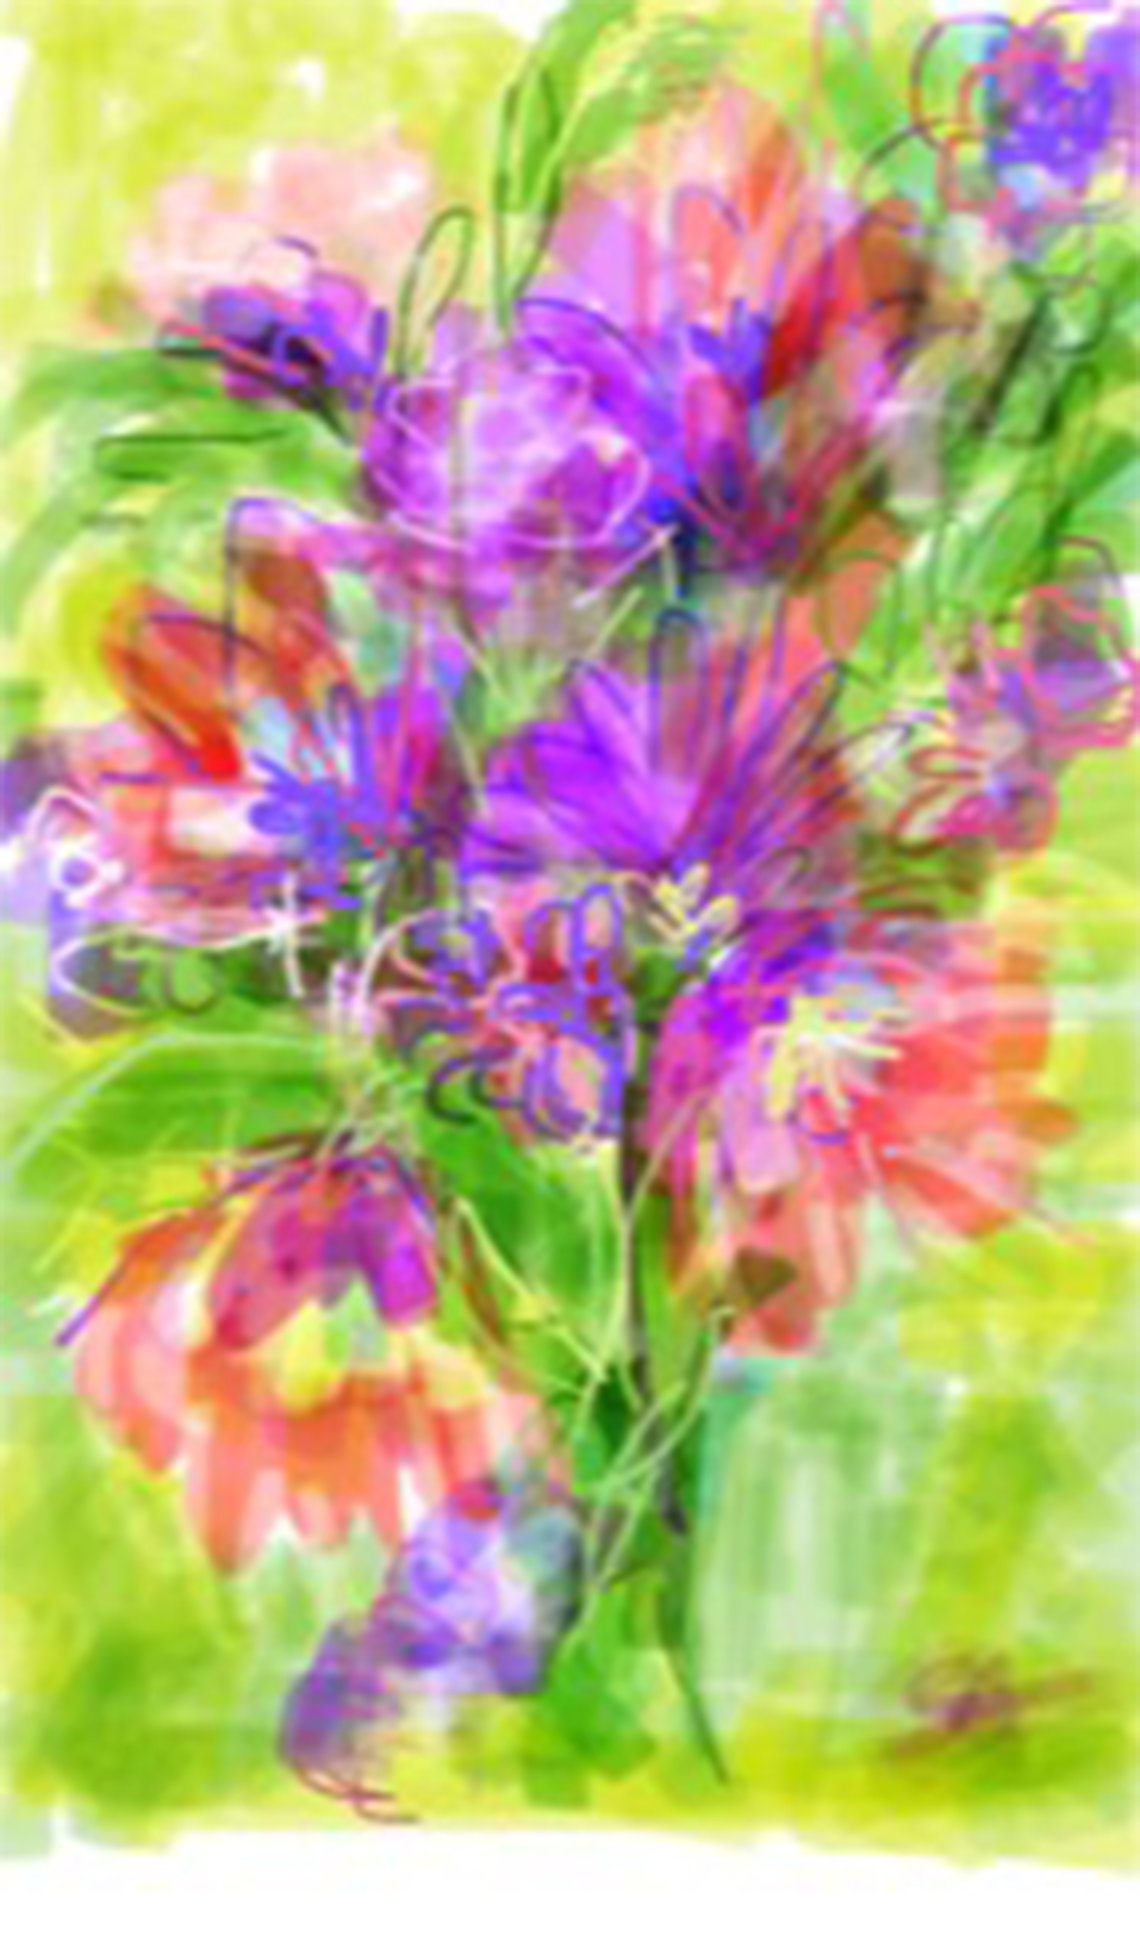 Painting of purple and orange flowers with wisps of red against a yellow and green background